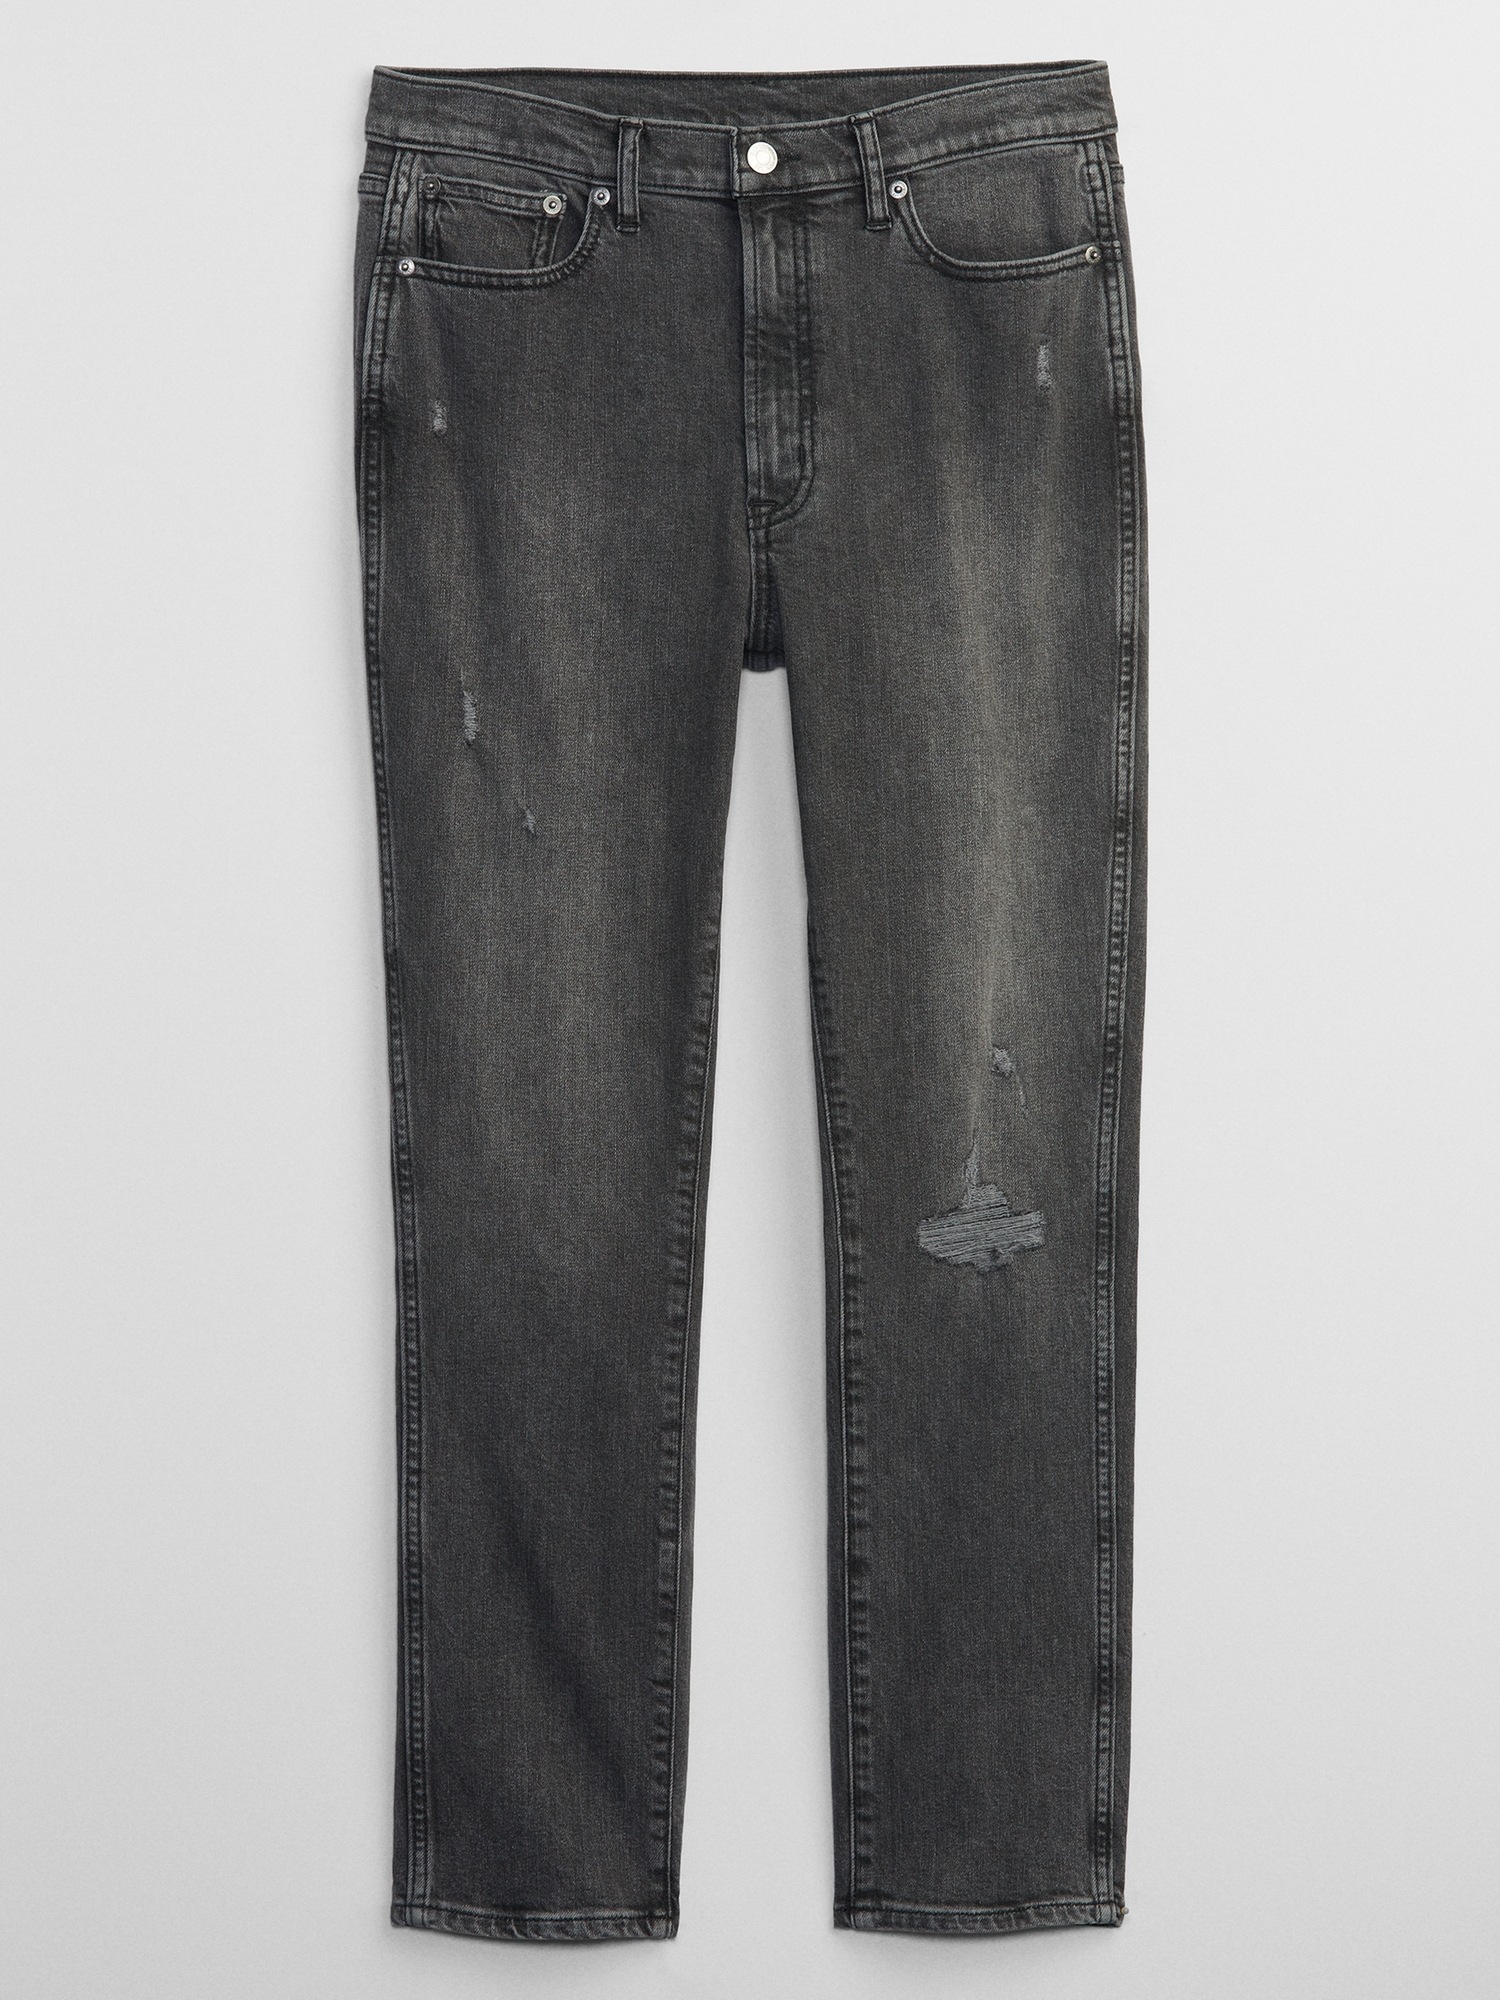 High Rise Destructed Vintage Slim Jeans with Washwell | Gap Factory